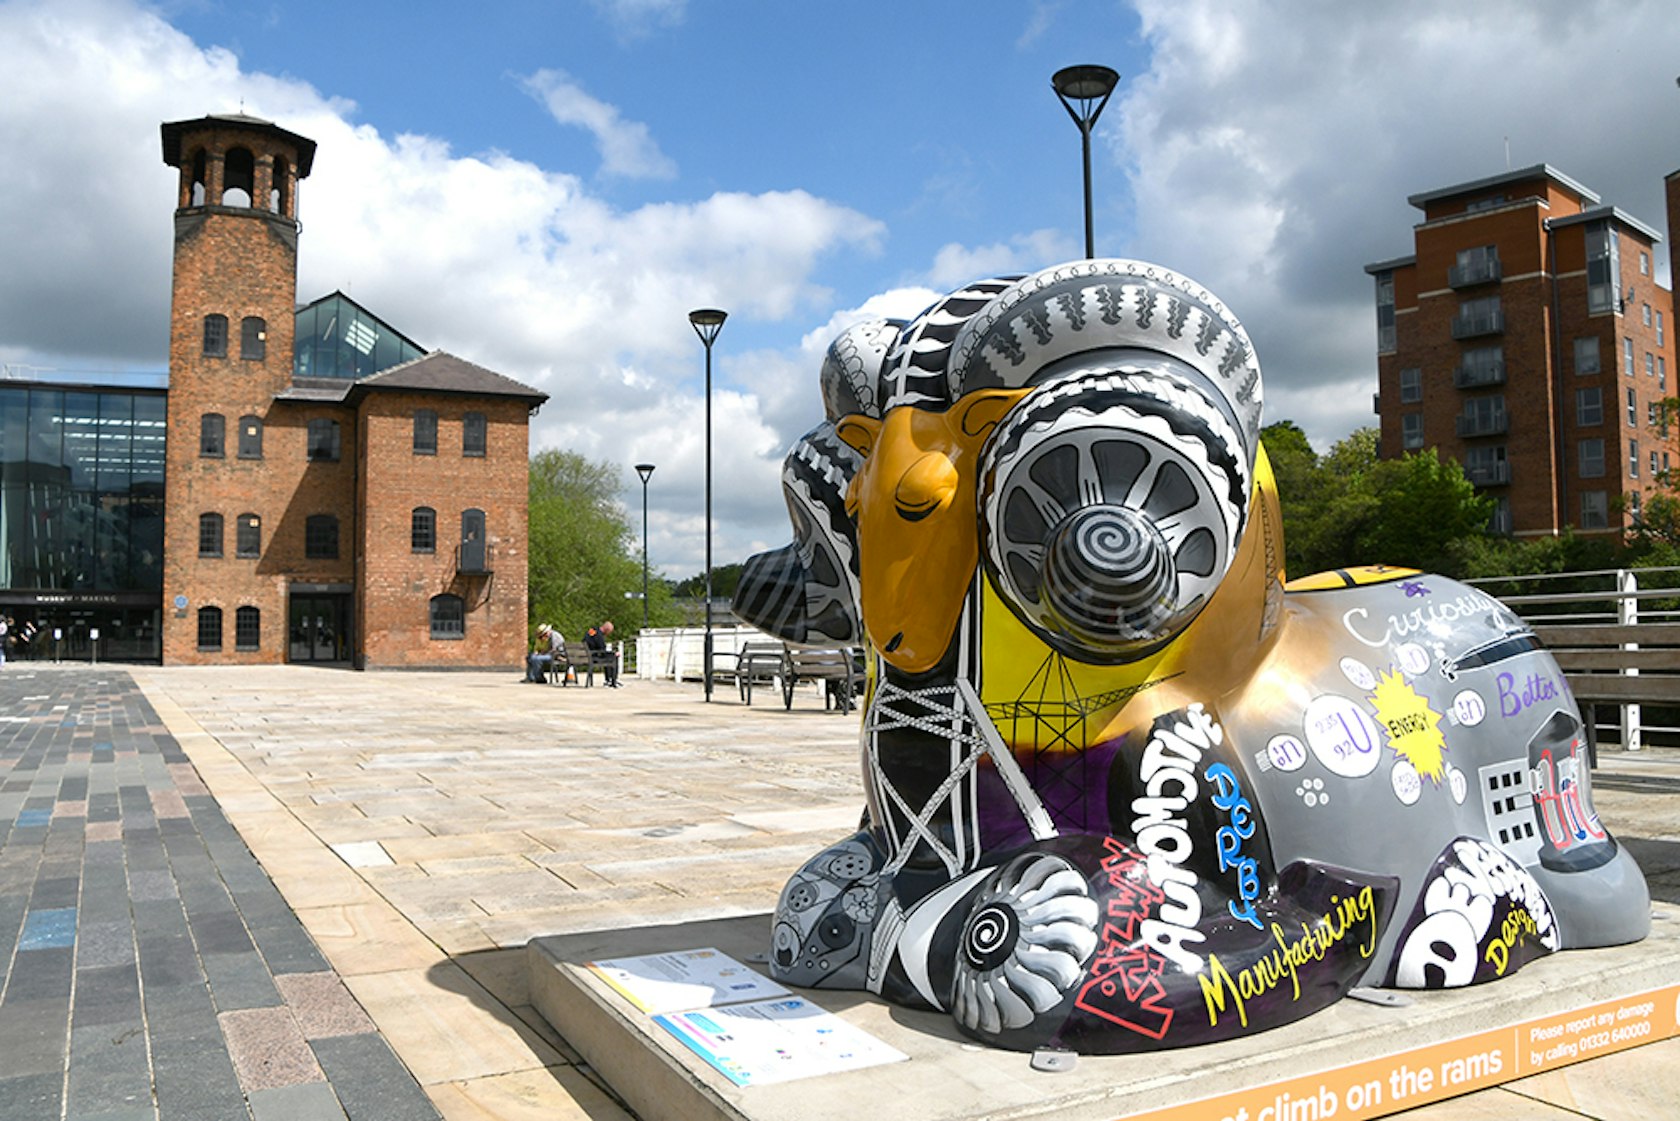 Derby Industries ram designed by Sarita Naqwi &#8211; Sati Design &#8211; outside the Museum of Making &#8211; Derby Museums